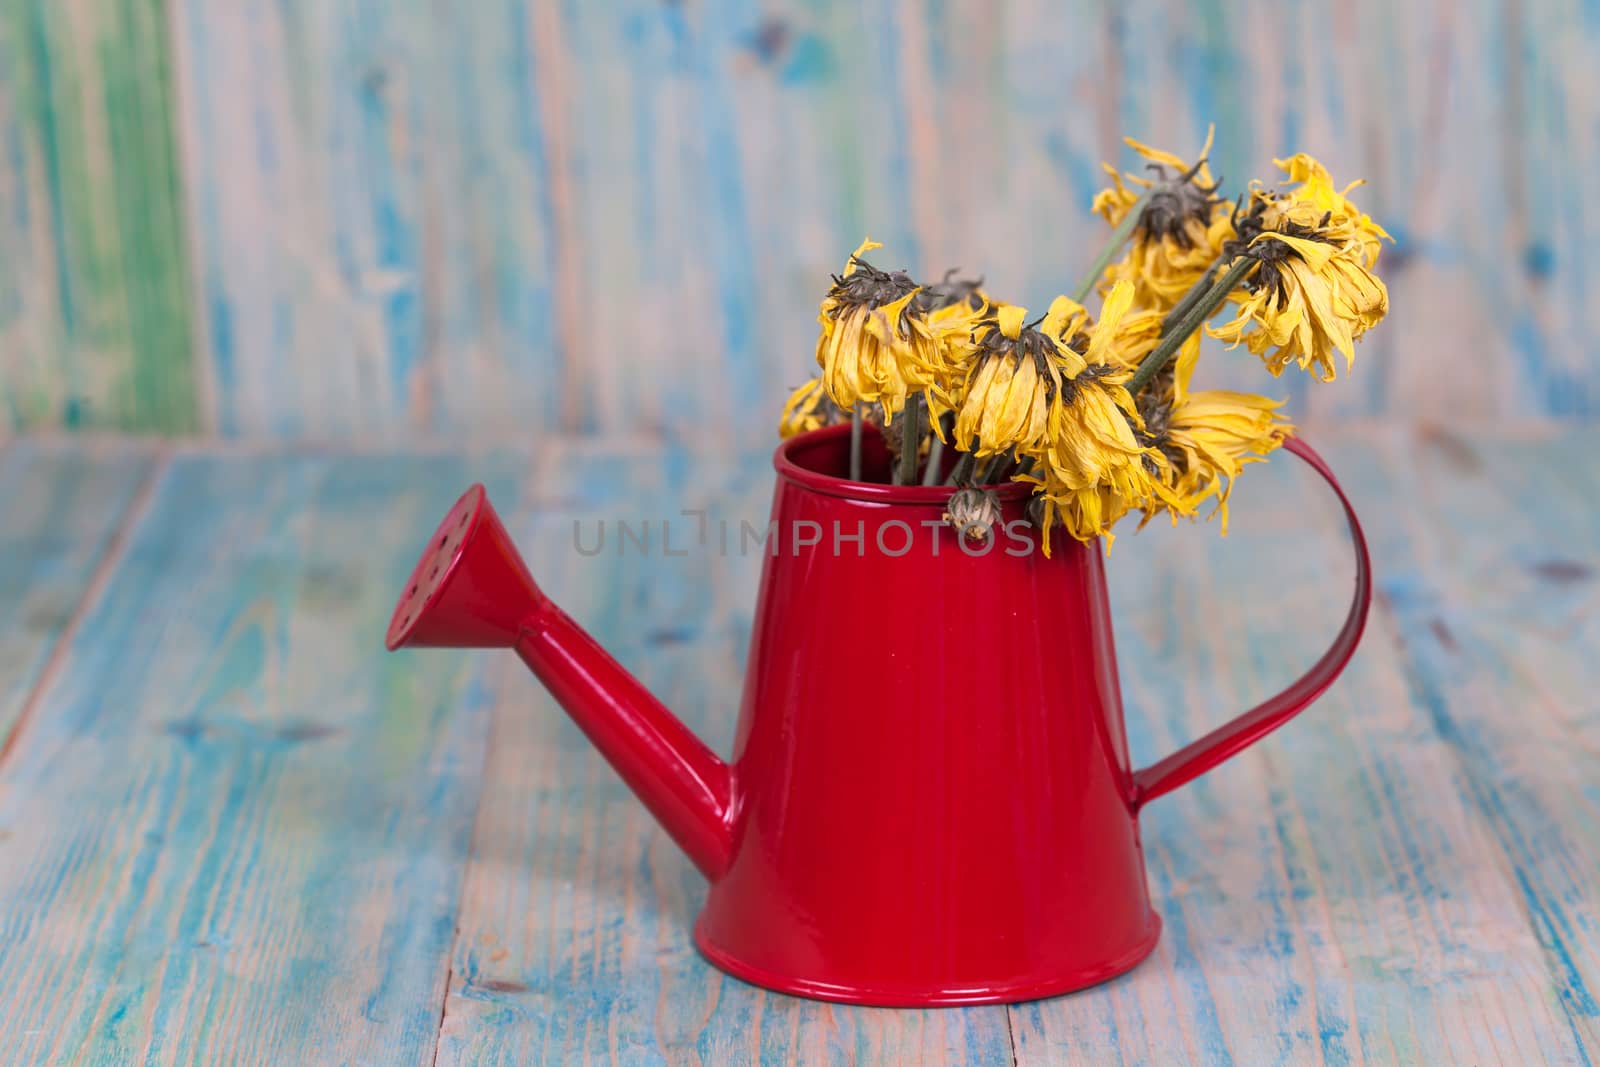 flowers with leaves in watering can on wood by amnarj2006